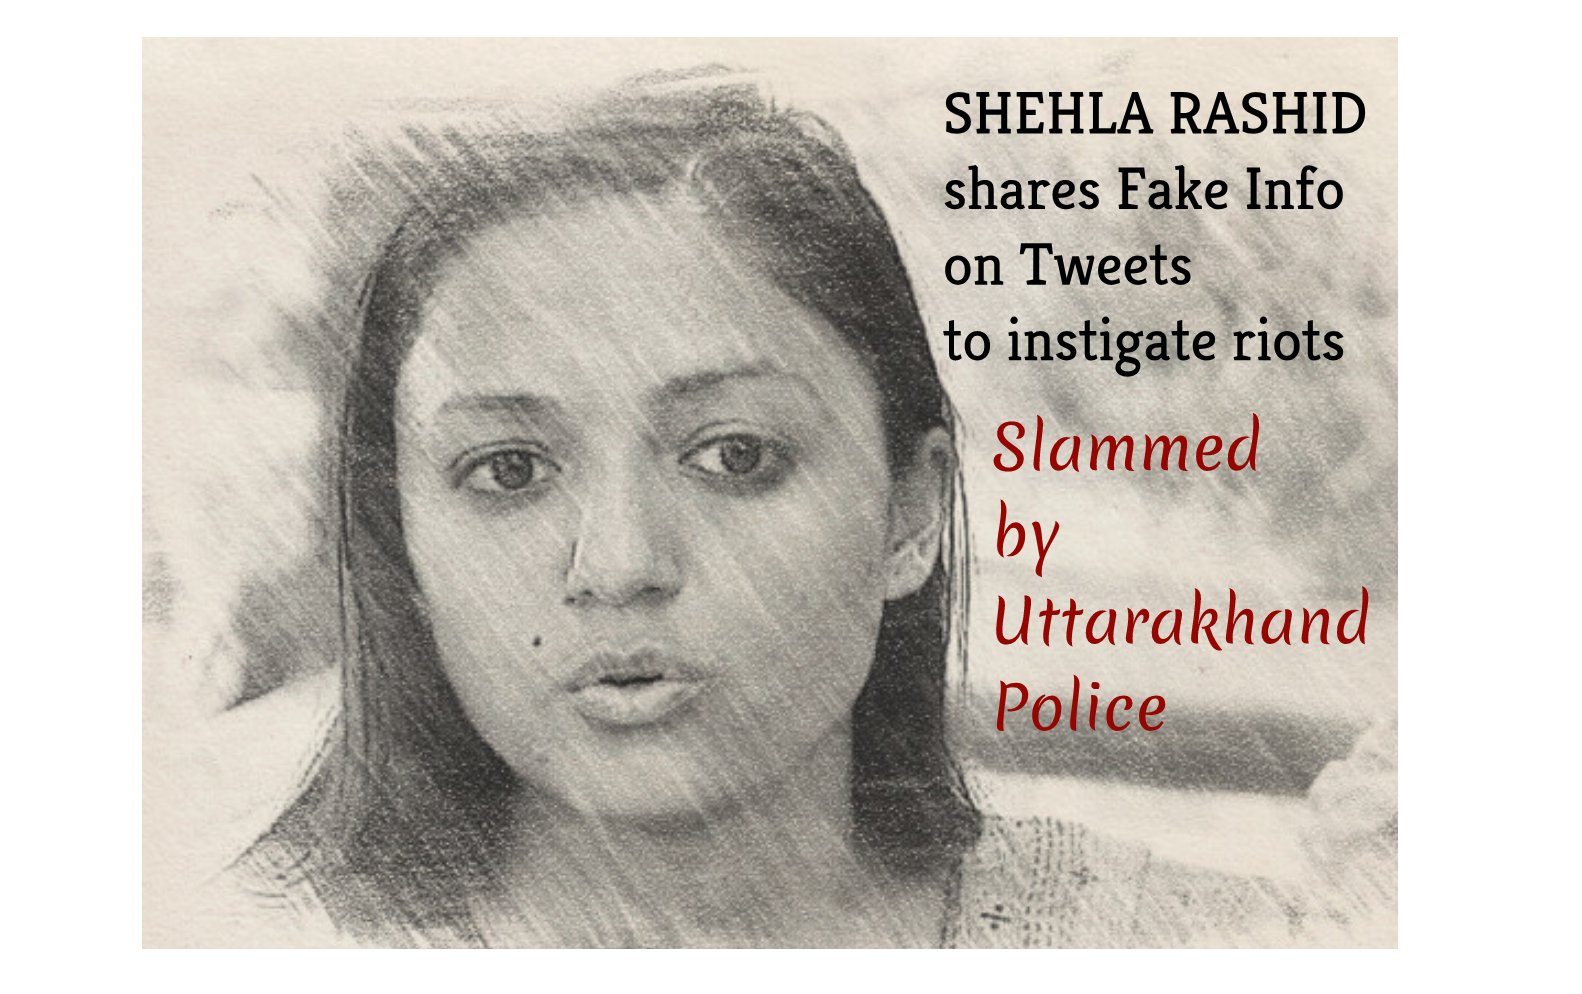                               Shehla Rashid Tries to Instigate a Riot in Uttarakhand with Fake News and Narrative, Gets Slammed by Police                             
                              